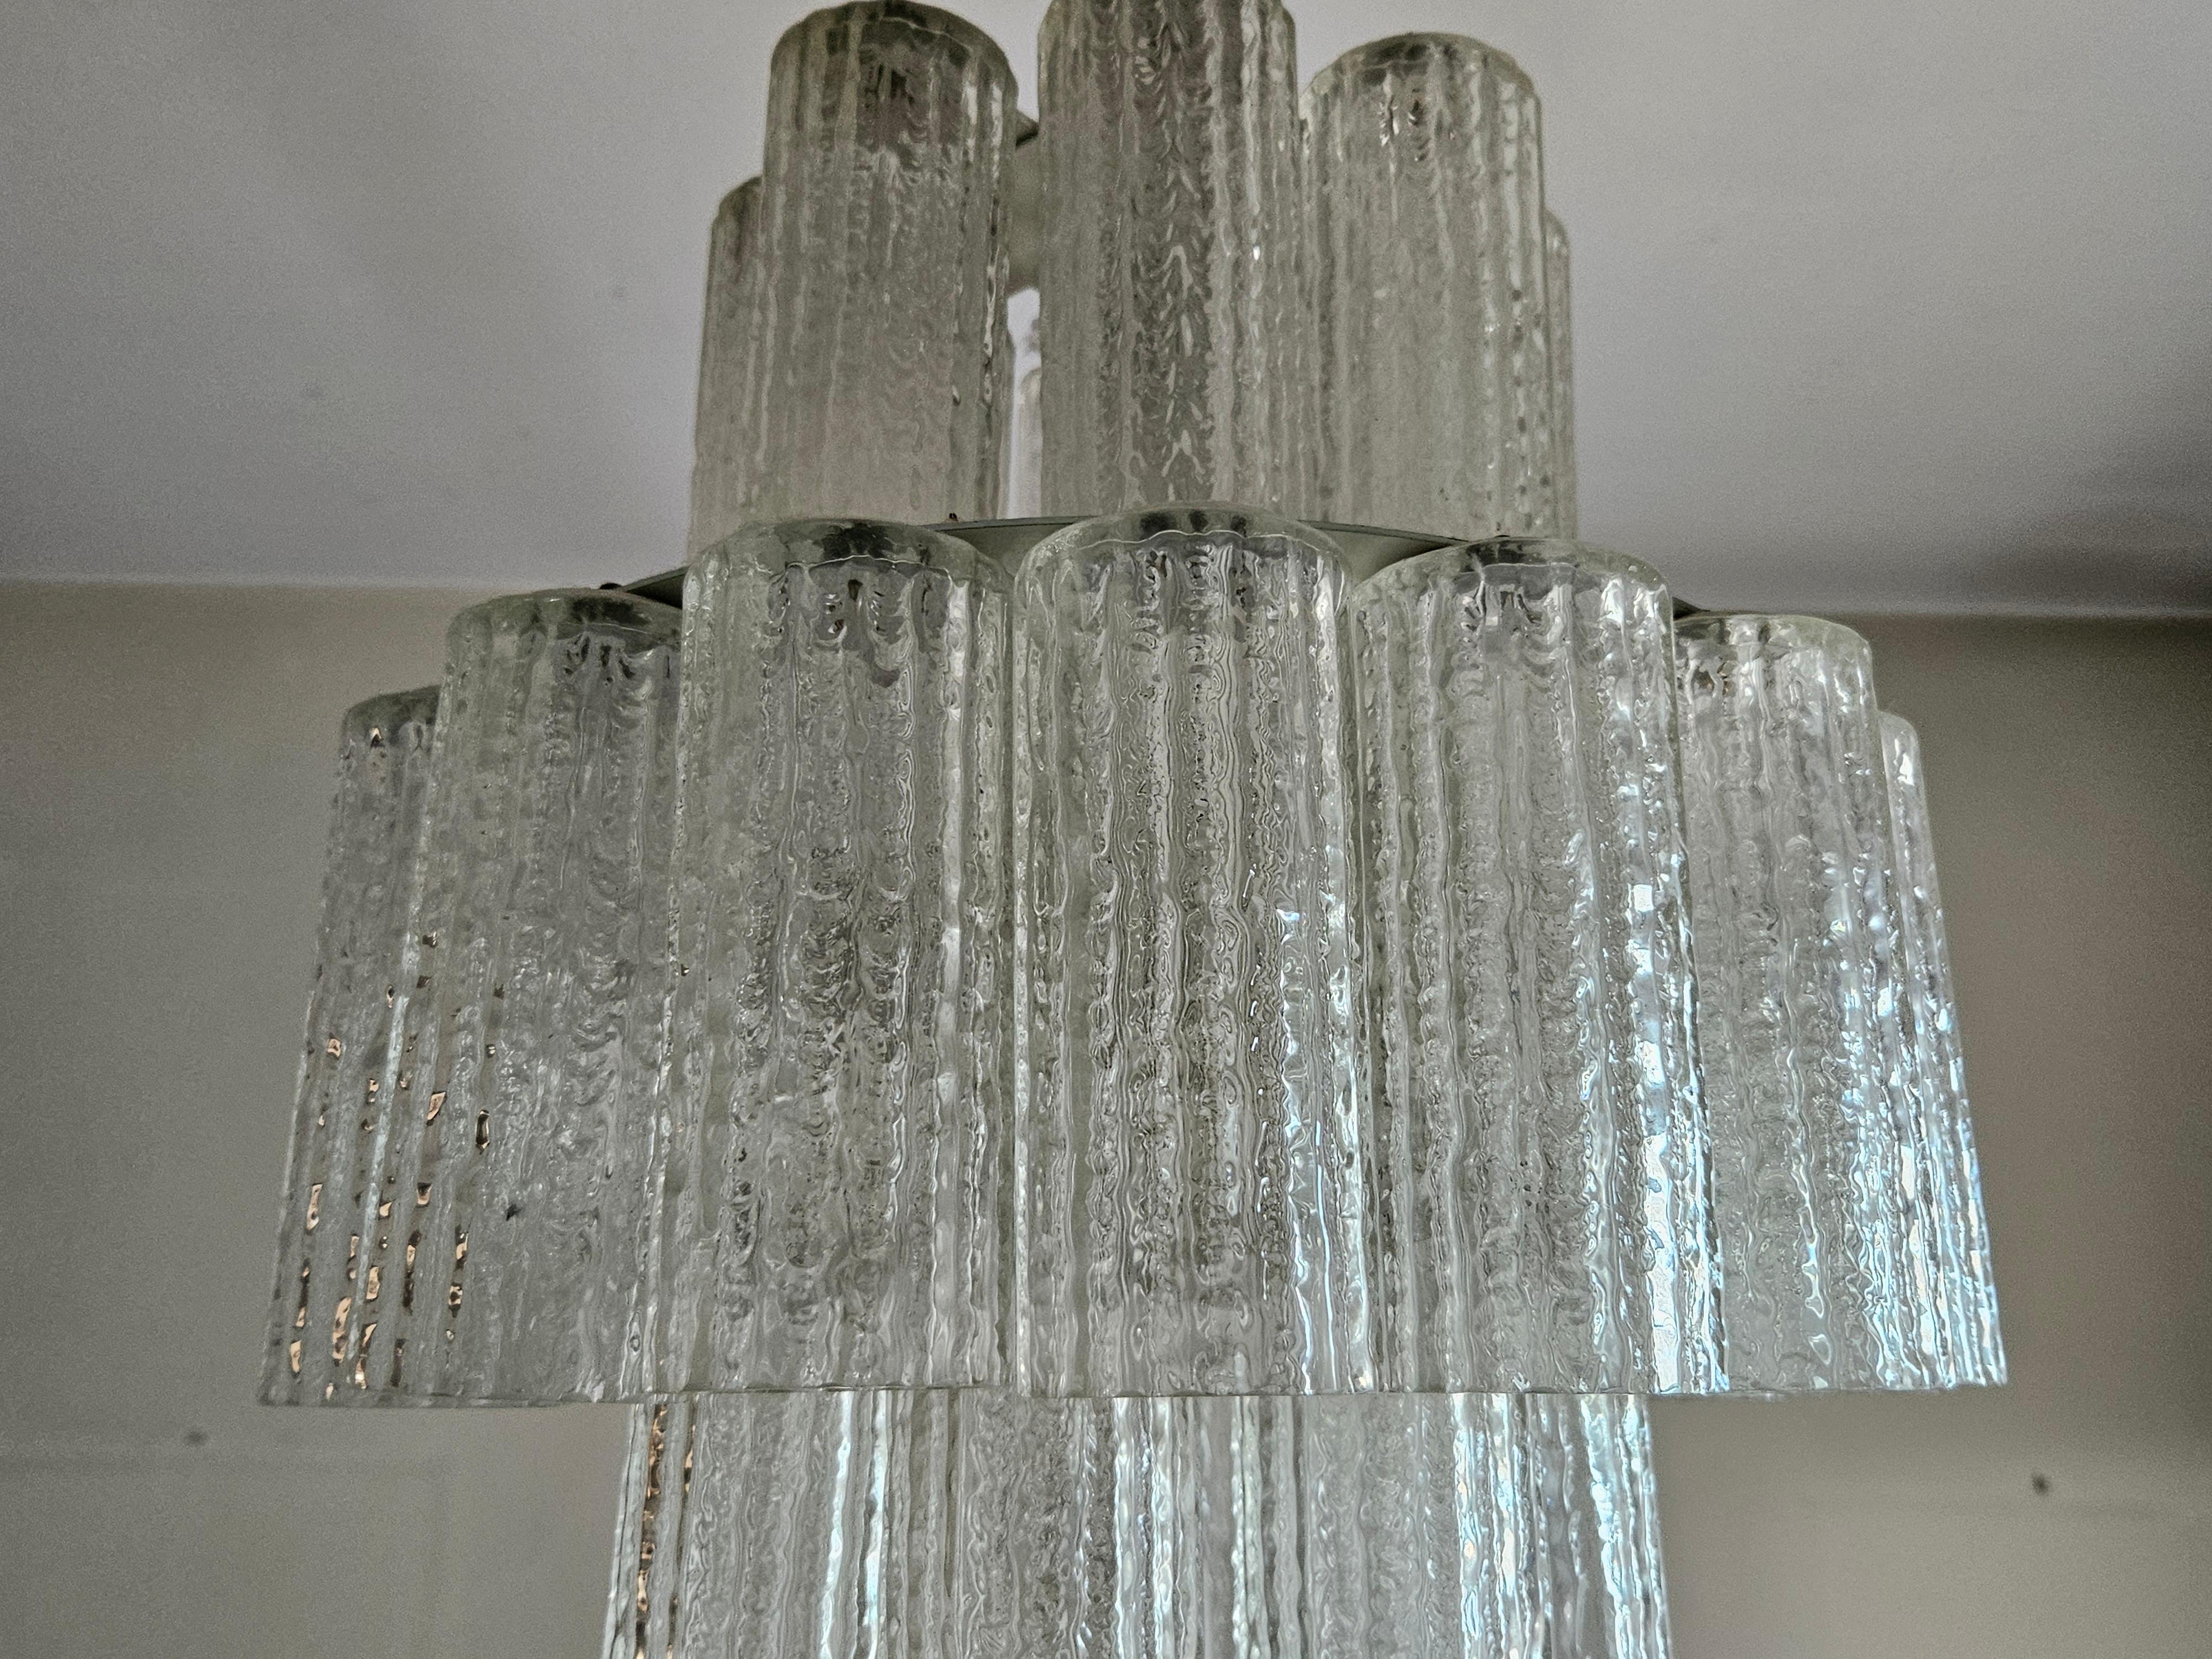 1970s Murano glass tubular chandelier In Good Condition For Sale In Premariacco, IT